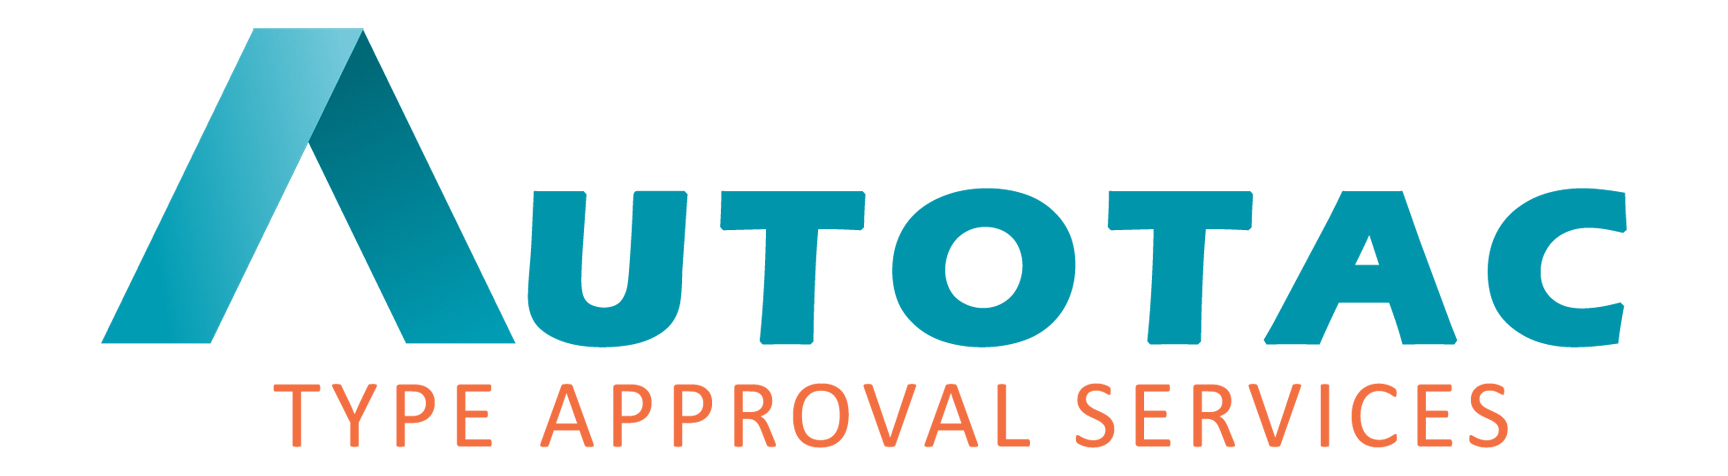 Autotac (Type Approval Consultancy)